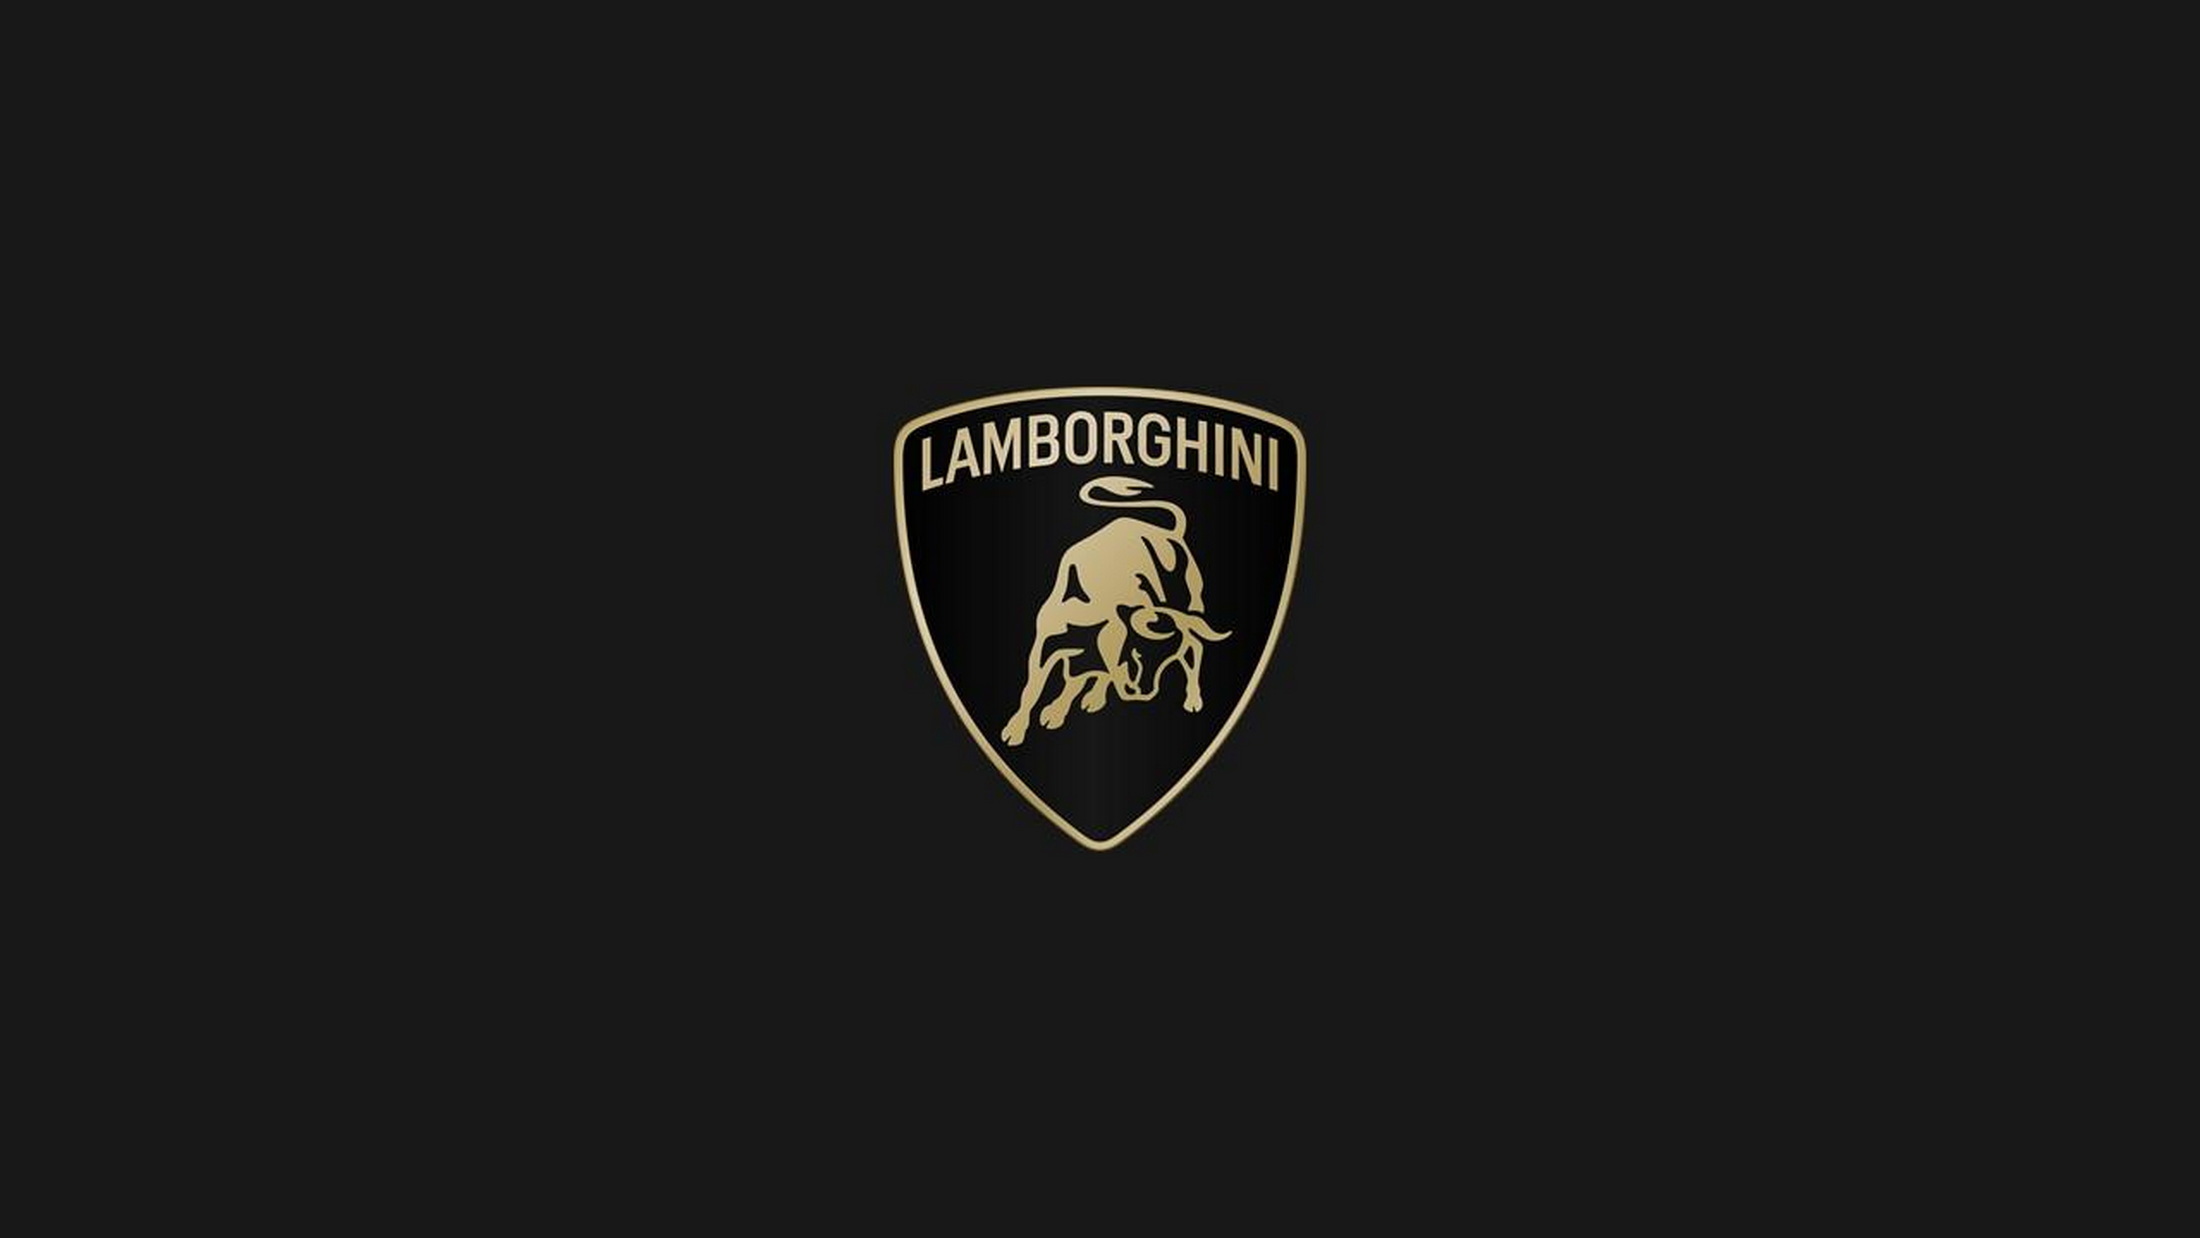 Lamborghini Charges Forward With A Sleeker New Raging Bull Logo [Video]